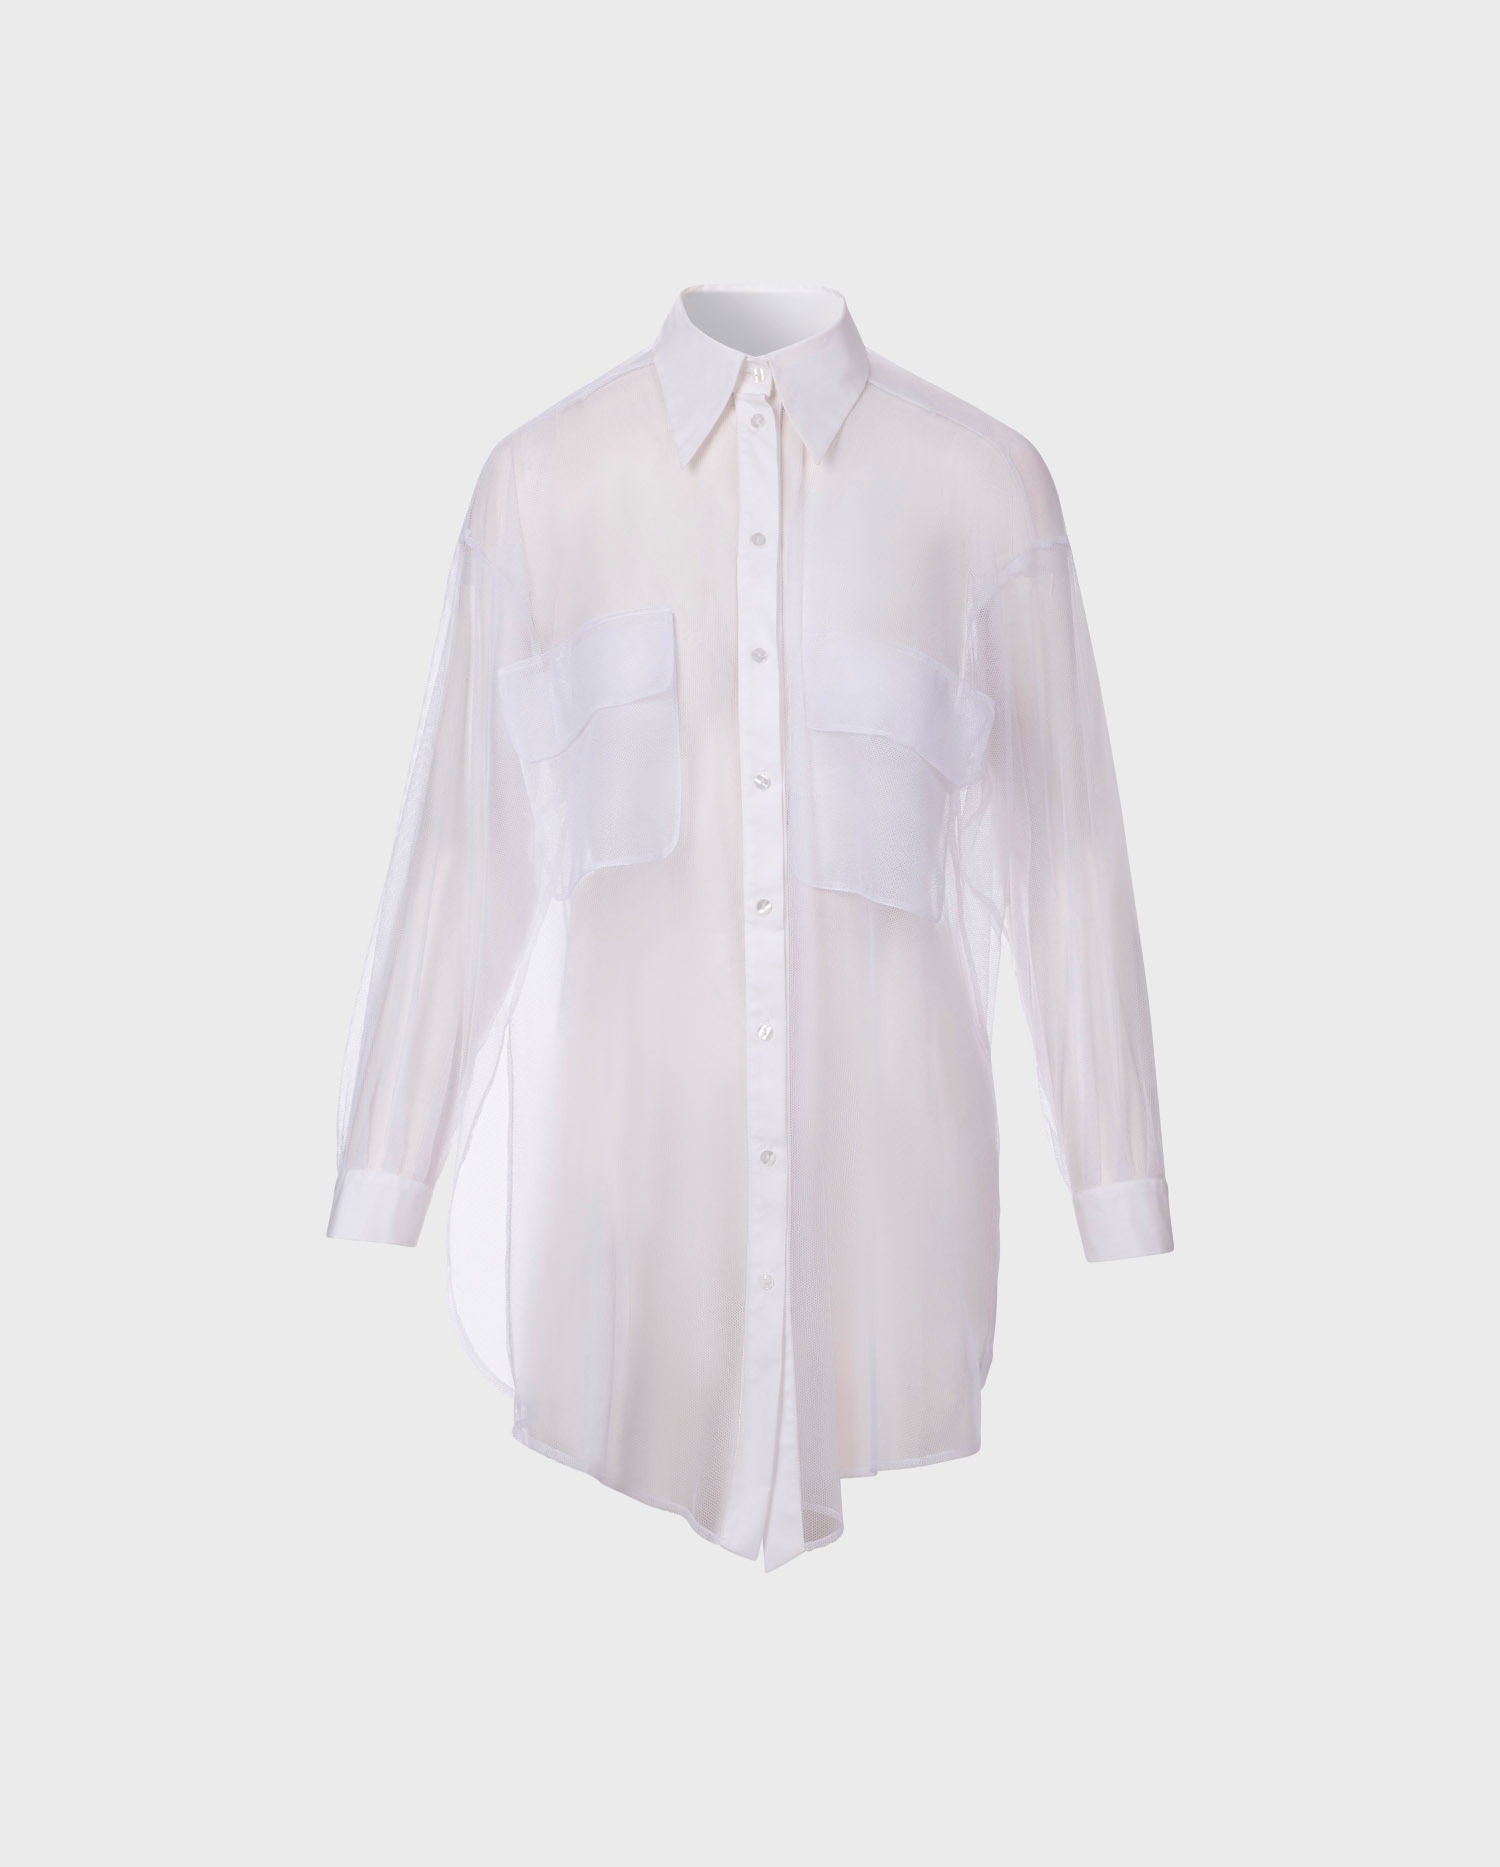 The white sheer BRASILIA shirt is the perfect dynamic silhouette to add to your Parisian chic wardrobe.